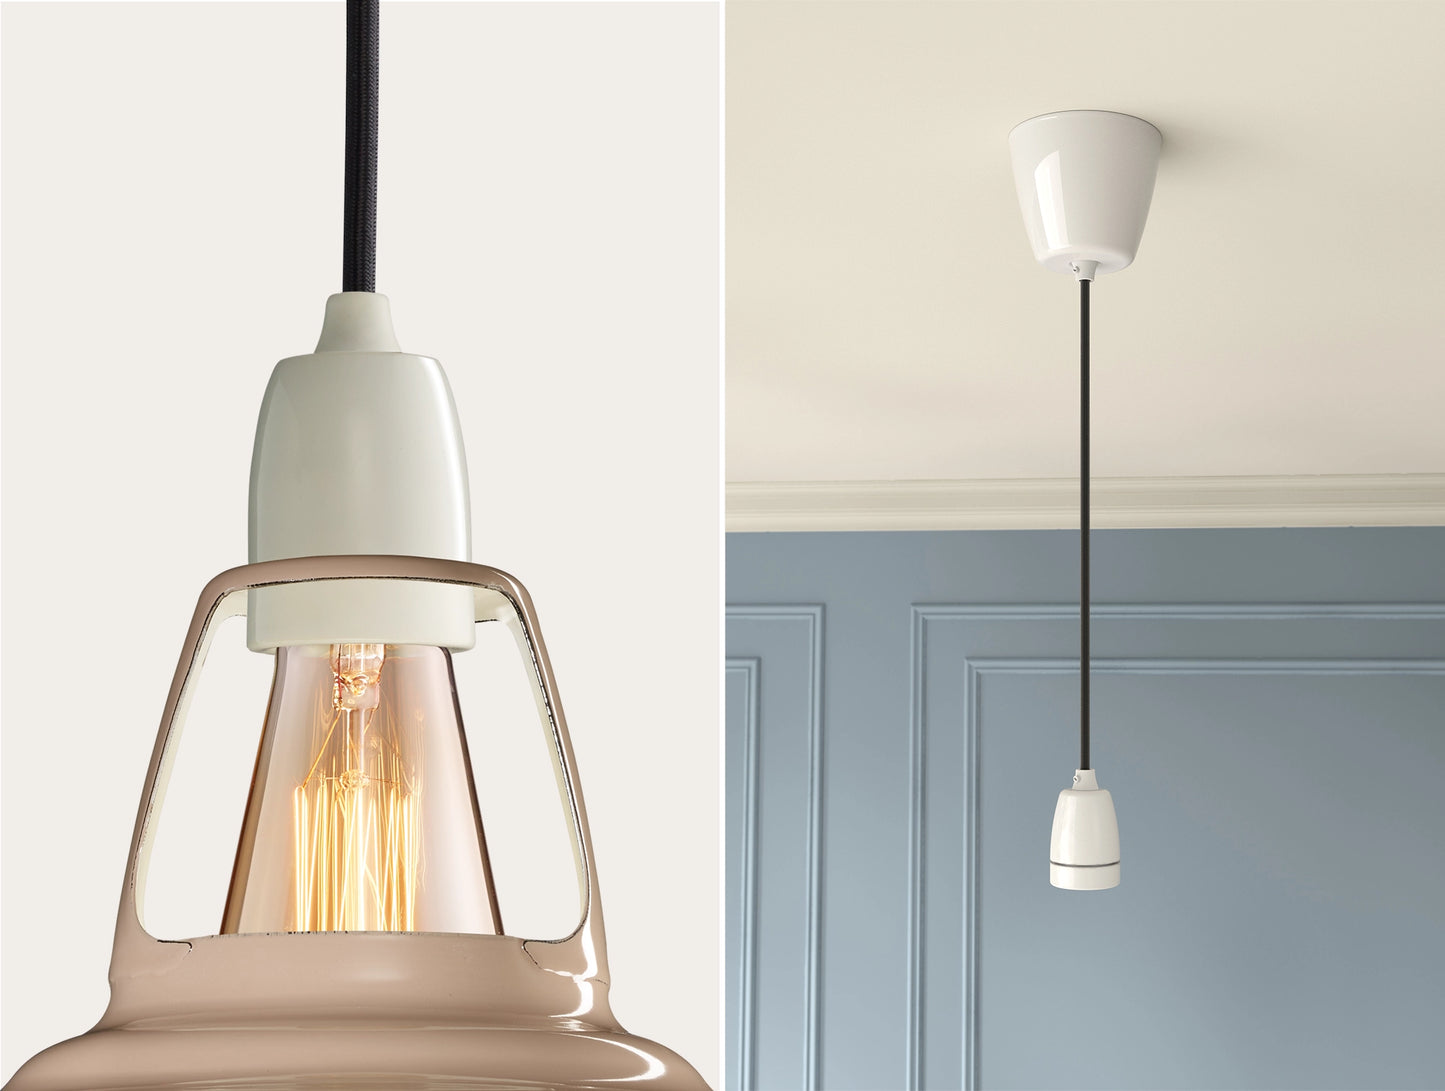 Close up of an E27 Porcelain suspension set on a Latte Brown lampshade on the left. On the right, an E27 Porcelain pendant set is hanging from the ceiling